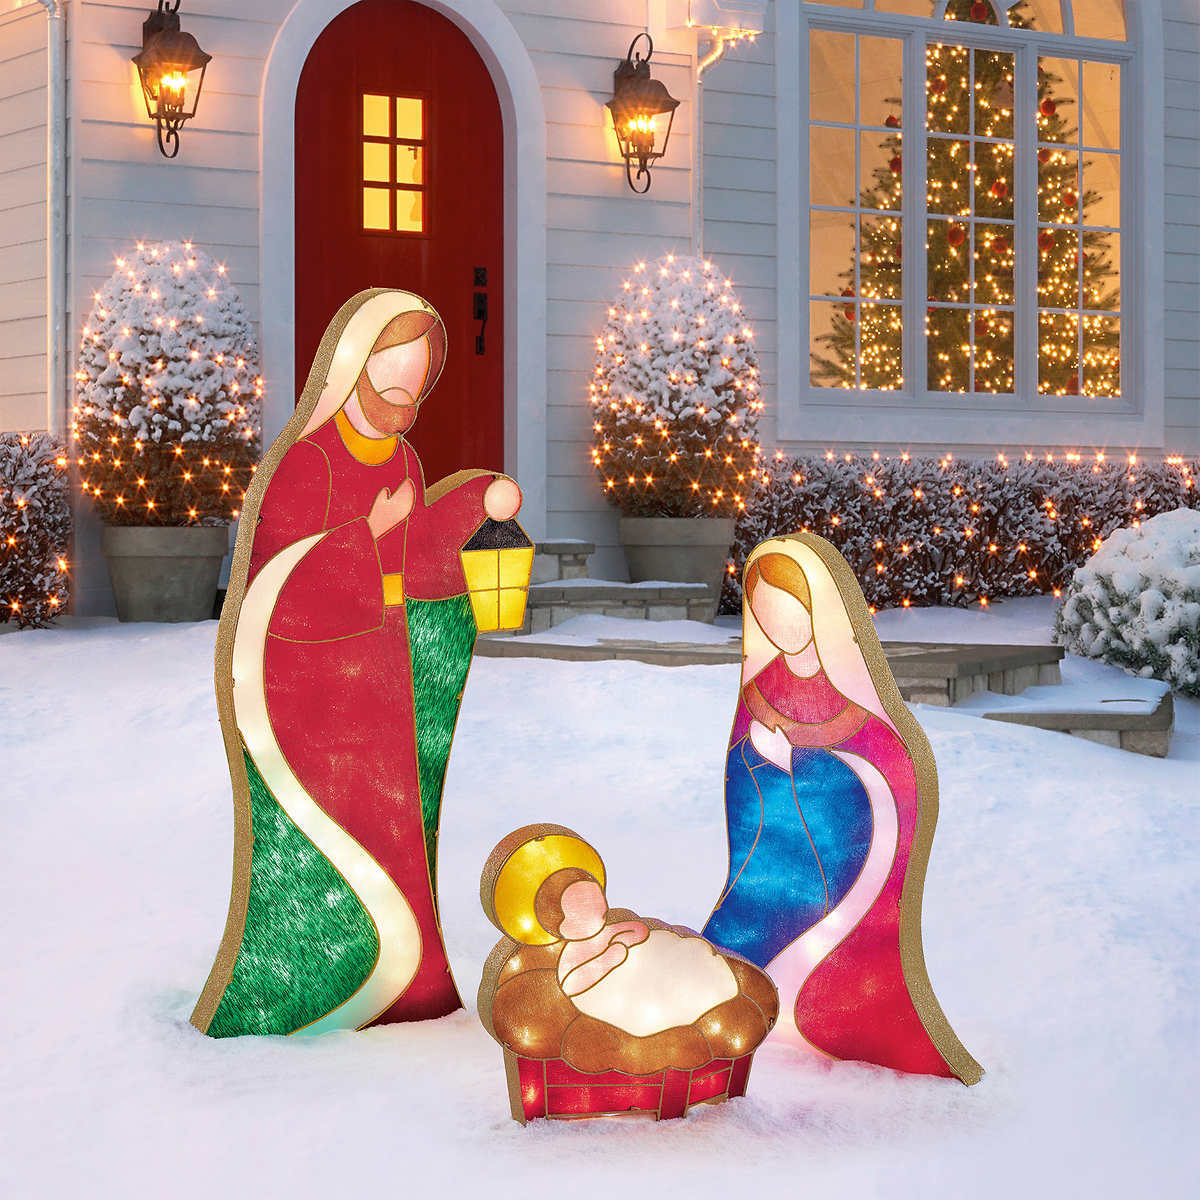 4ft 8 Inches (1.42 m) Christmas Indoor / Outdoor Nativity Scene With ...